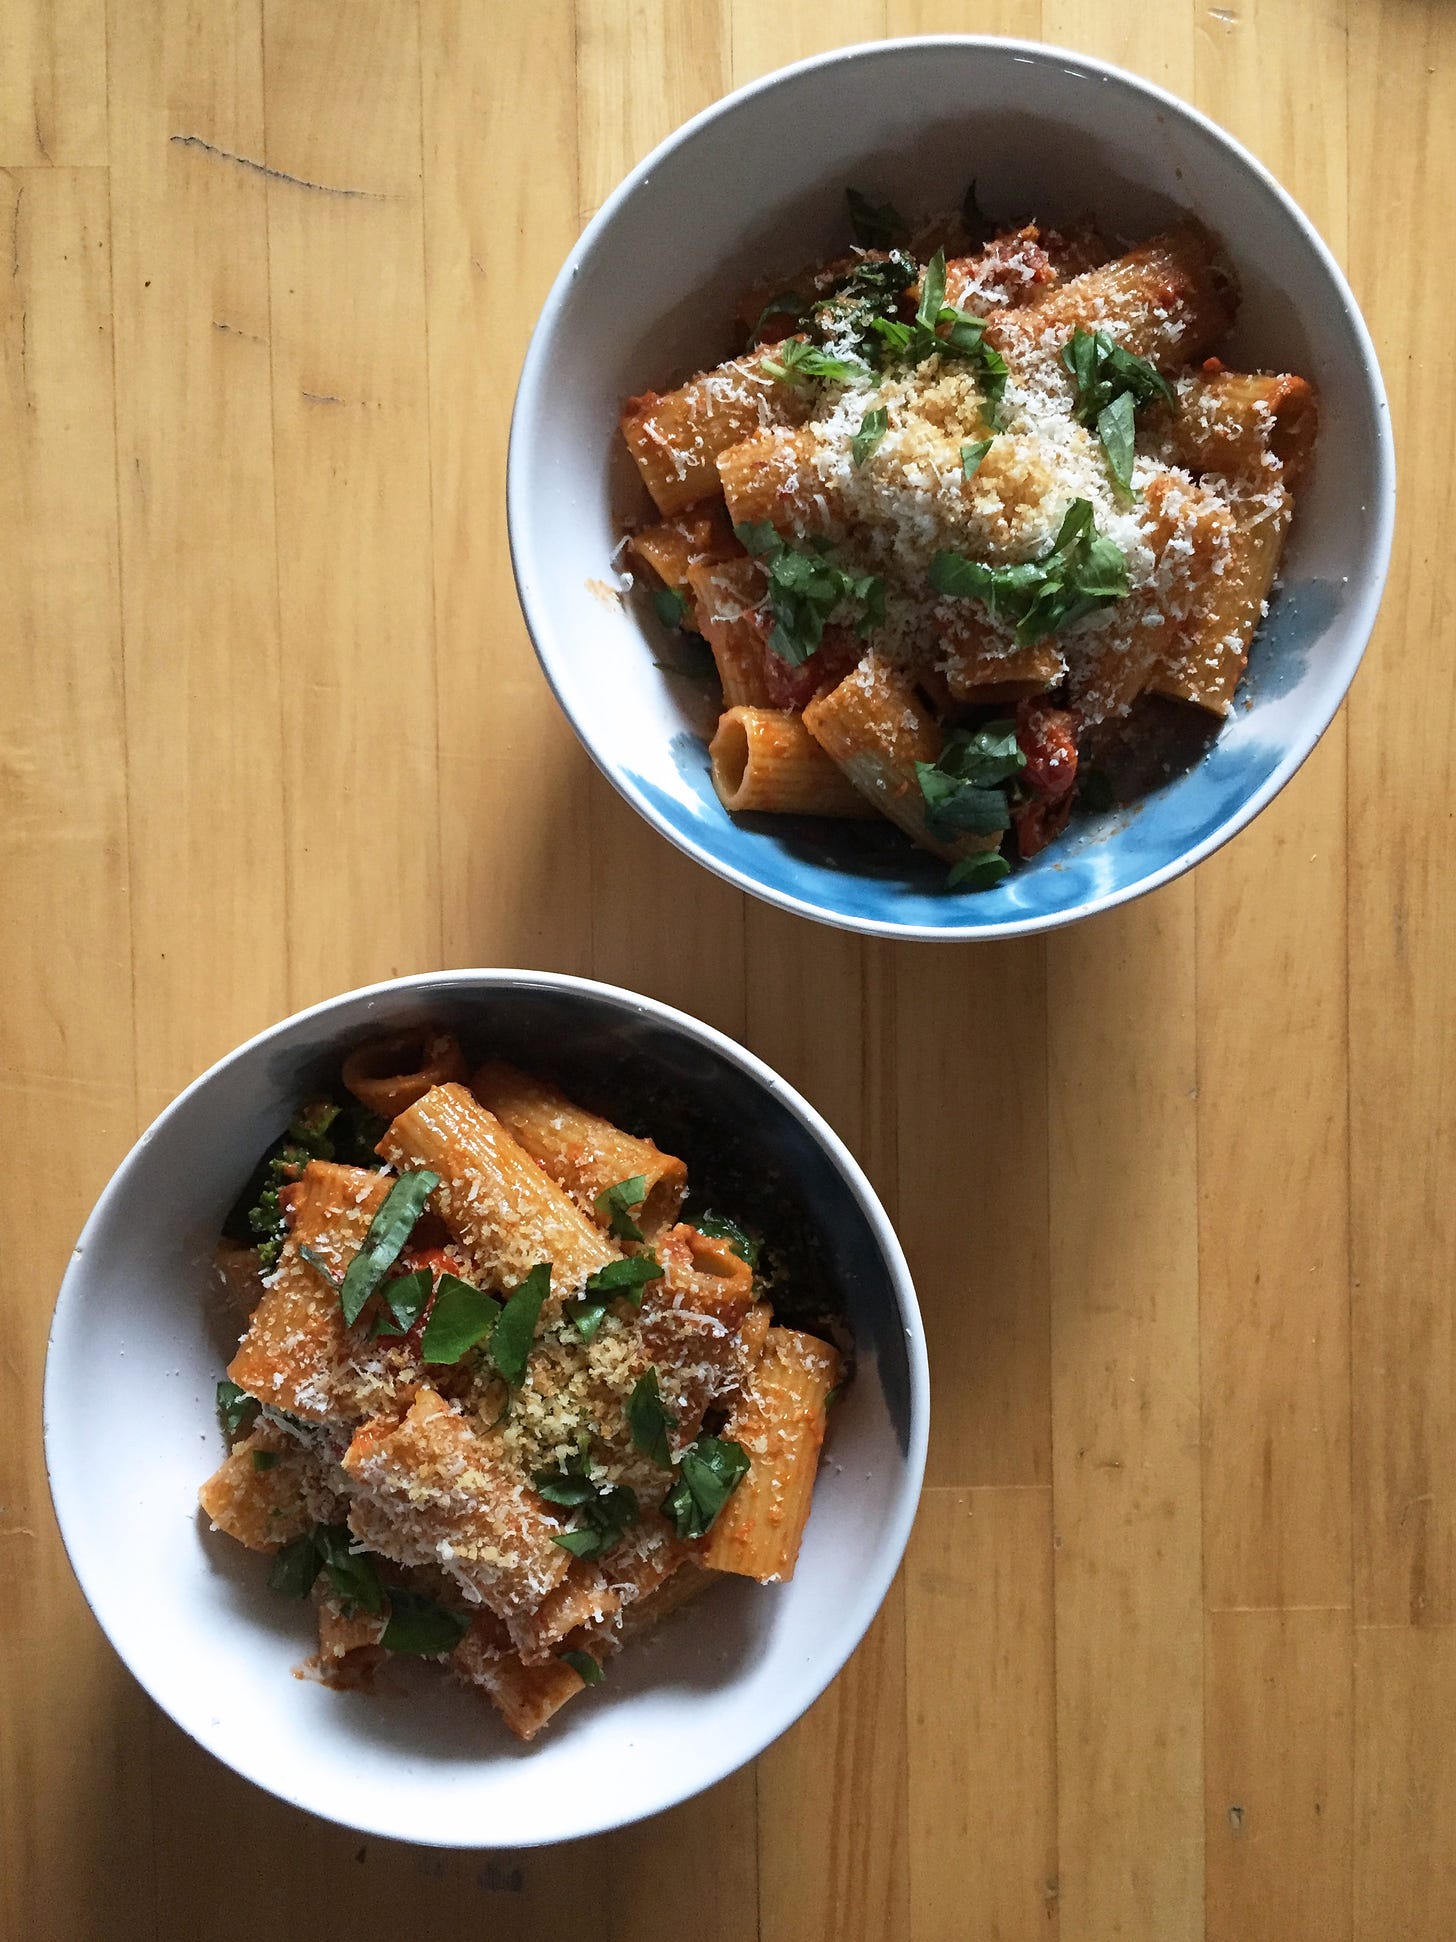 two white bowls of rigatoni in a dark red pesto sauce, with shreds of basil, parmesan, and toasted panko crumbs on top.